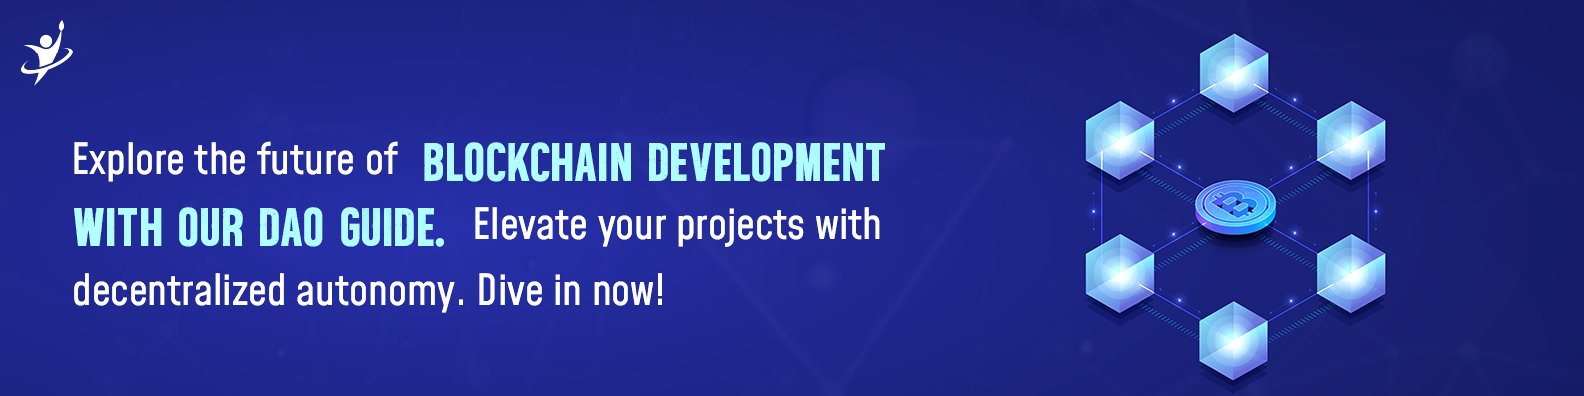 Blockchain development with our dao guide